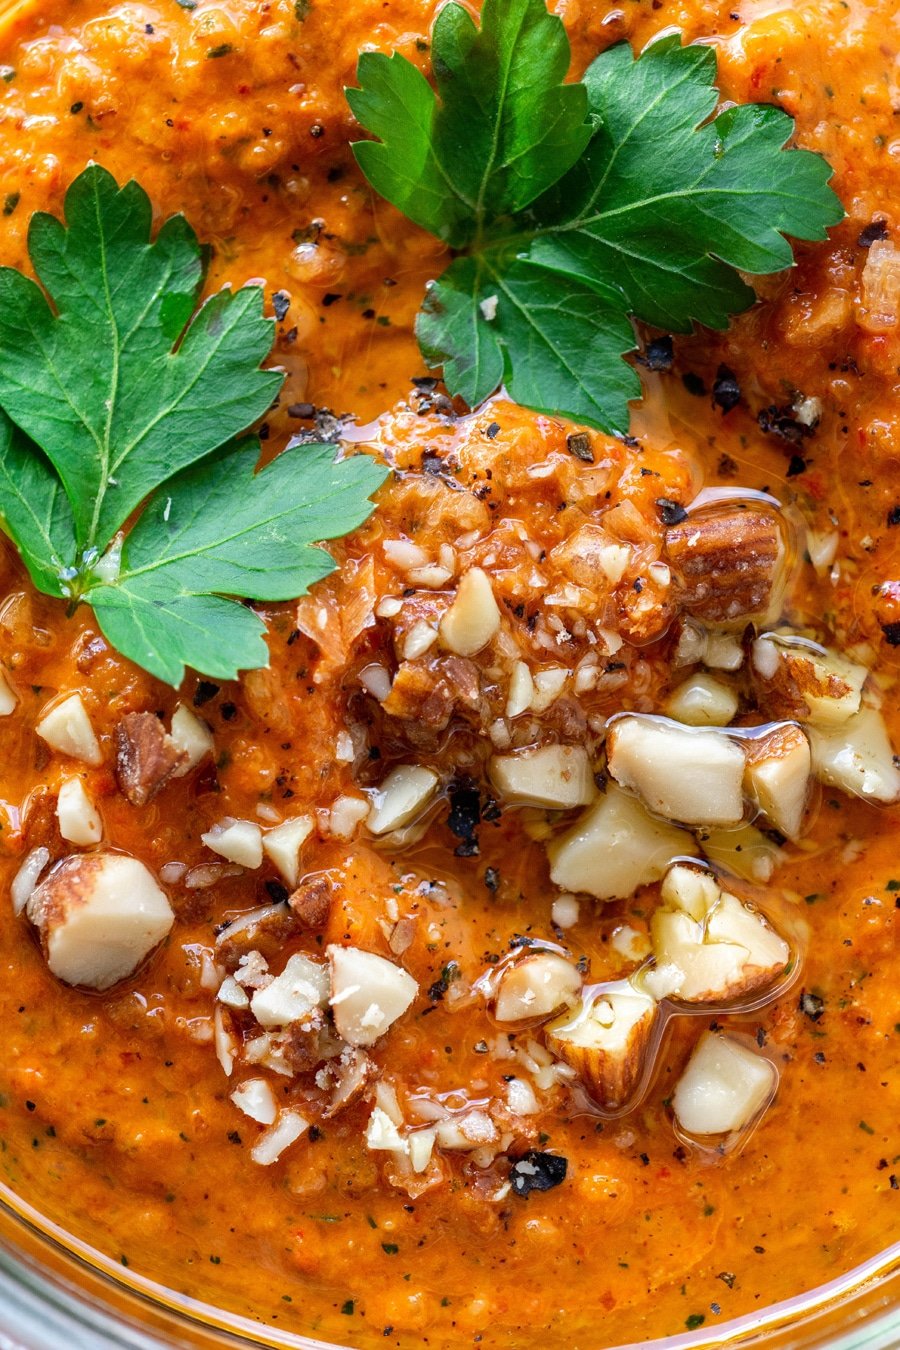 A close up view of bright orange romesco sauce topped with parsley leaves, chopped almonds, and black pepper